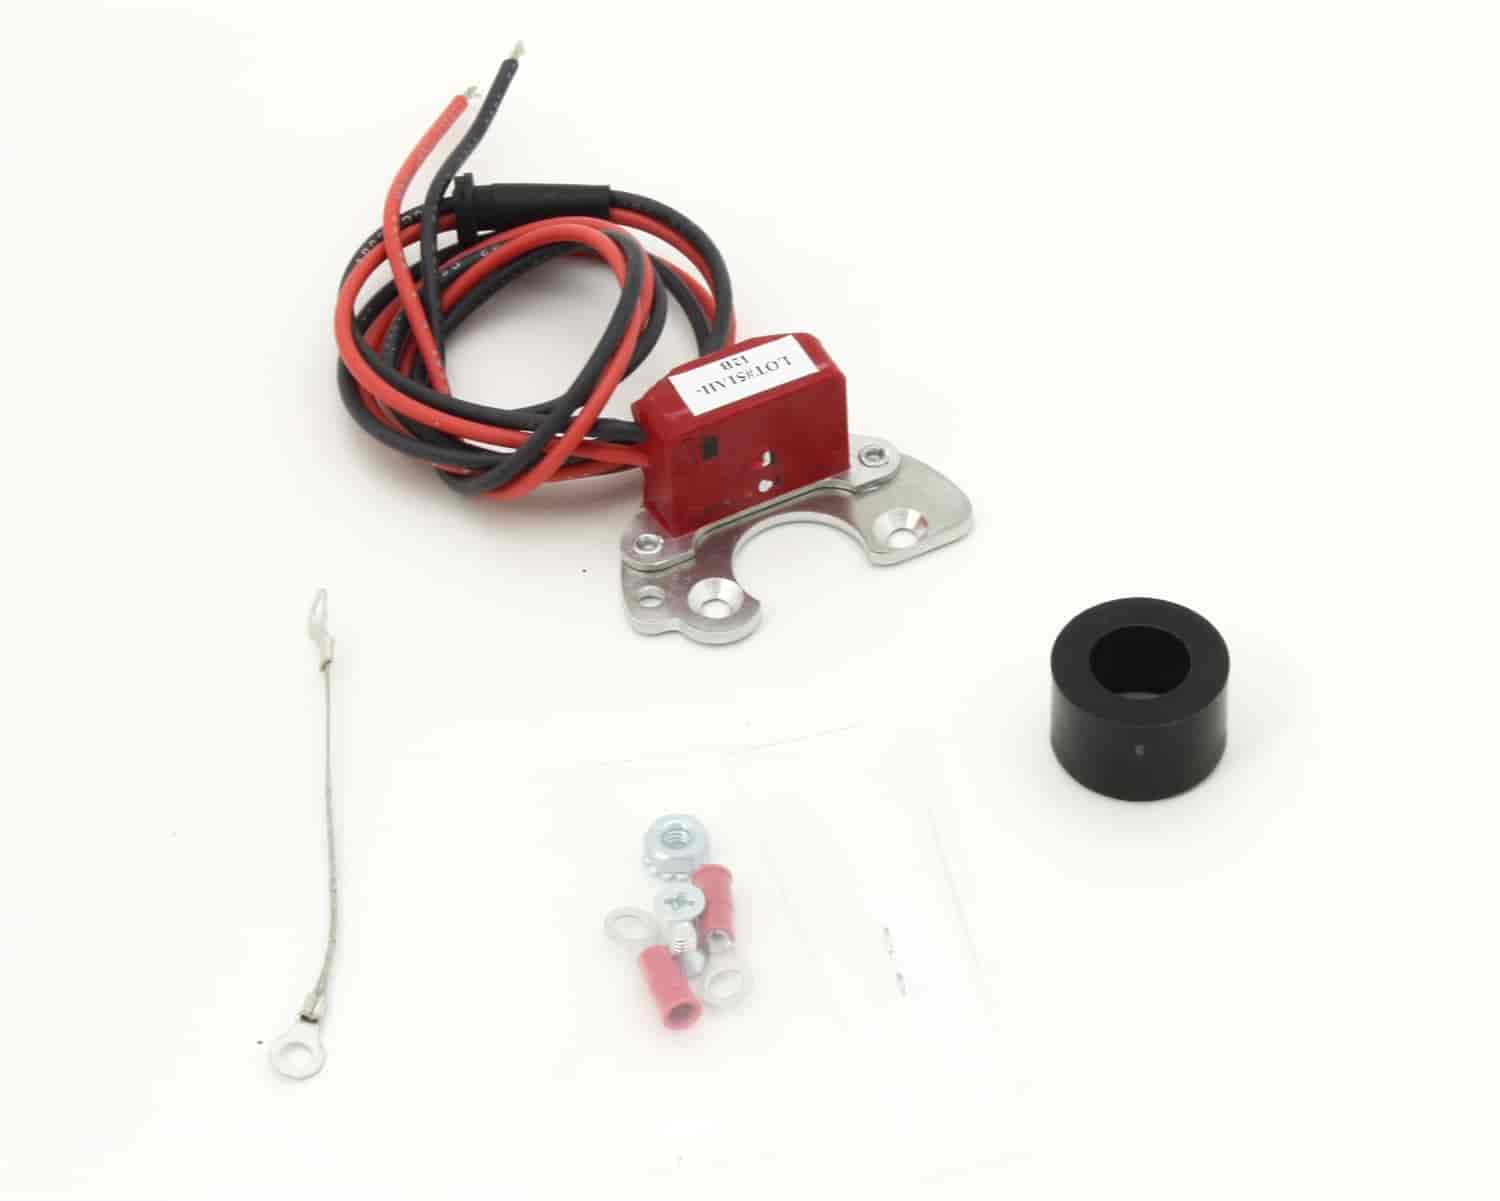 Ignitor II Electronic Ignition Conversion Kit for Toyota 6 cyl